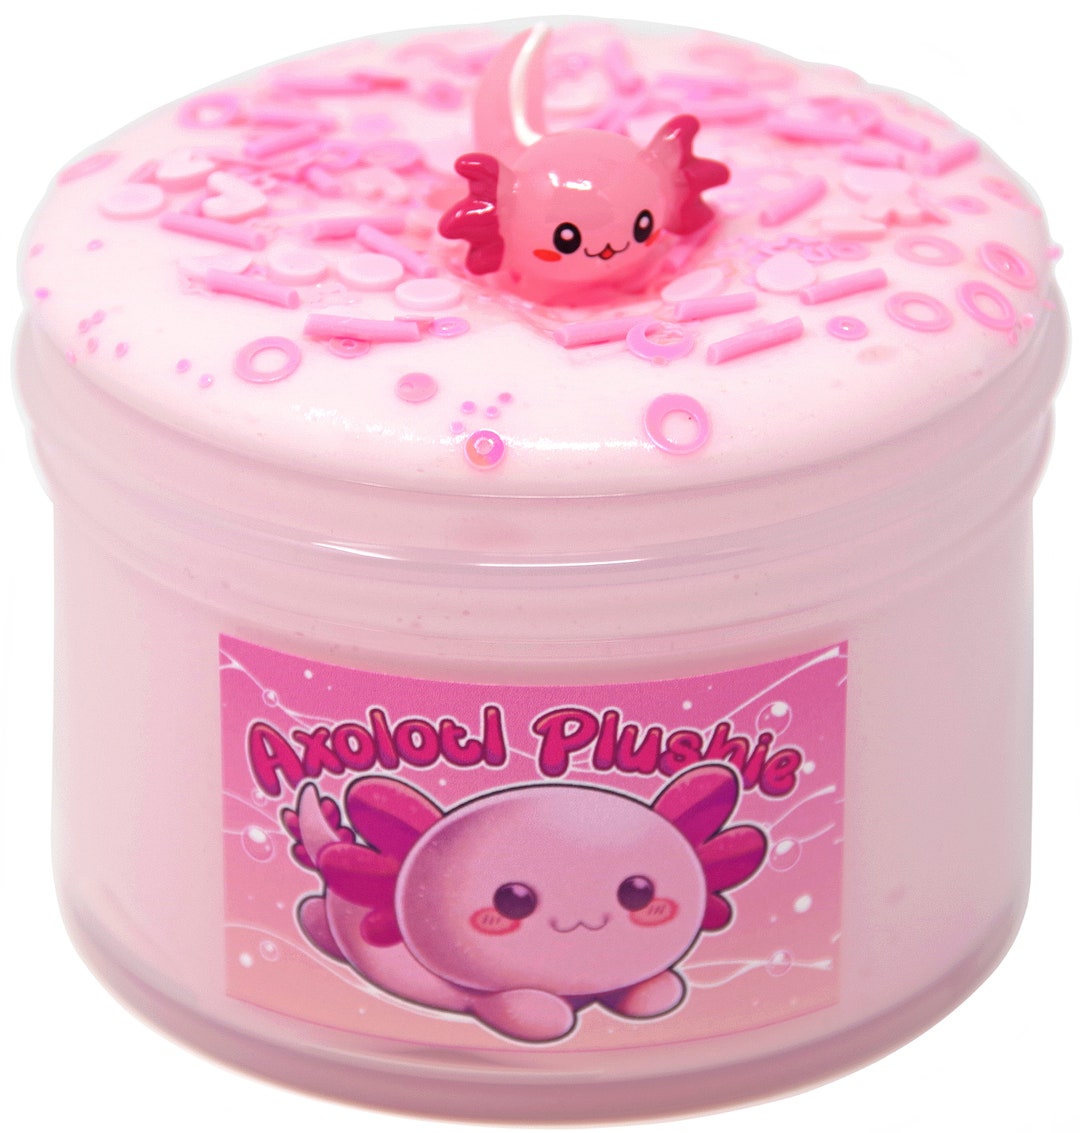 What other axolotl themed slime should we make?🤔 if you want a Peachy, Peachyslime